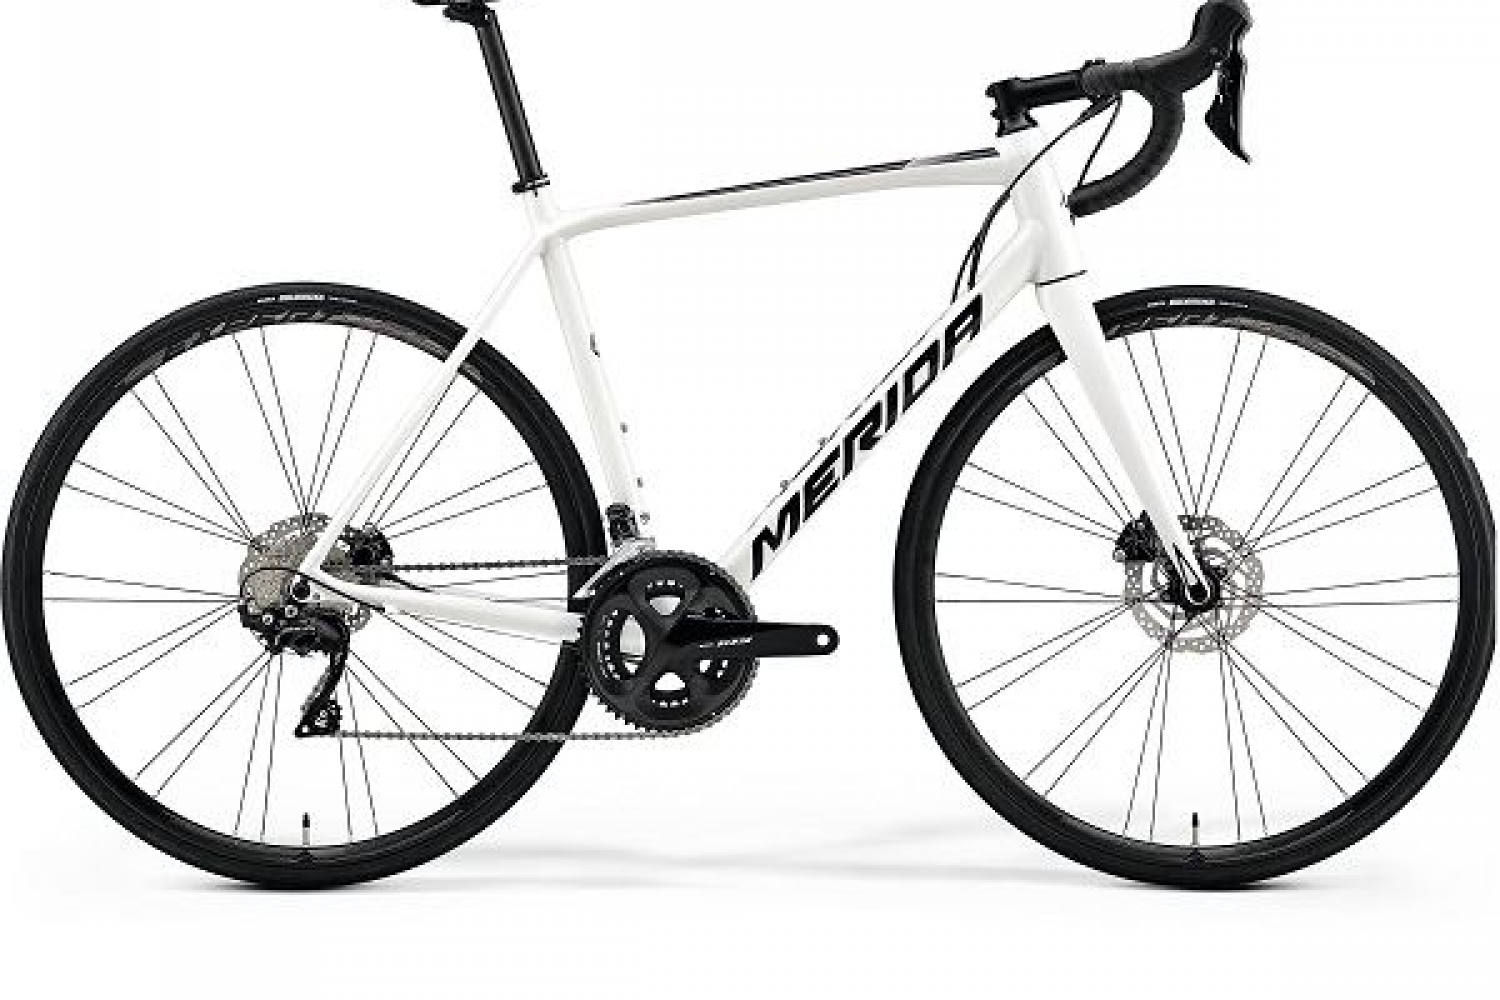 White racing bike with disk brakes.